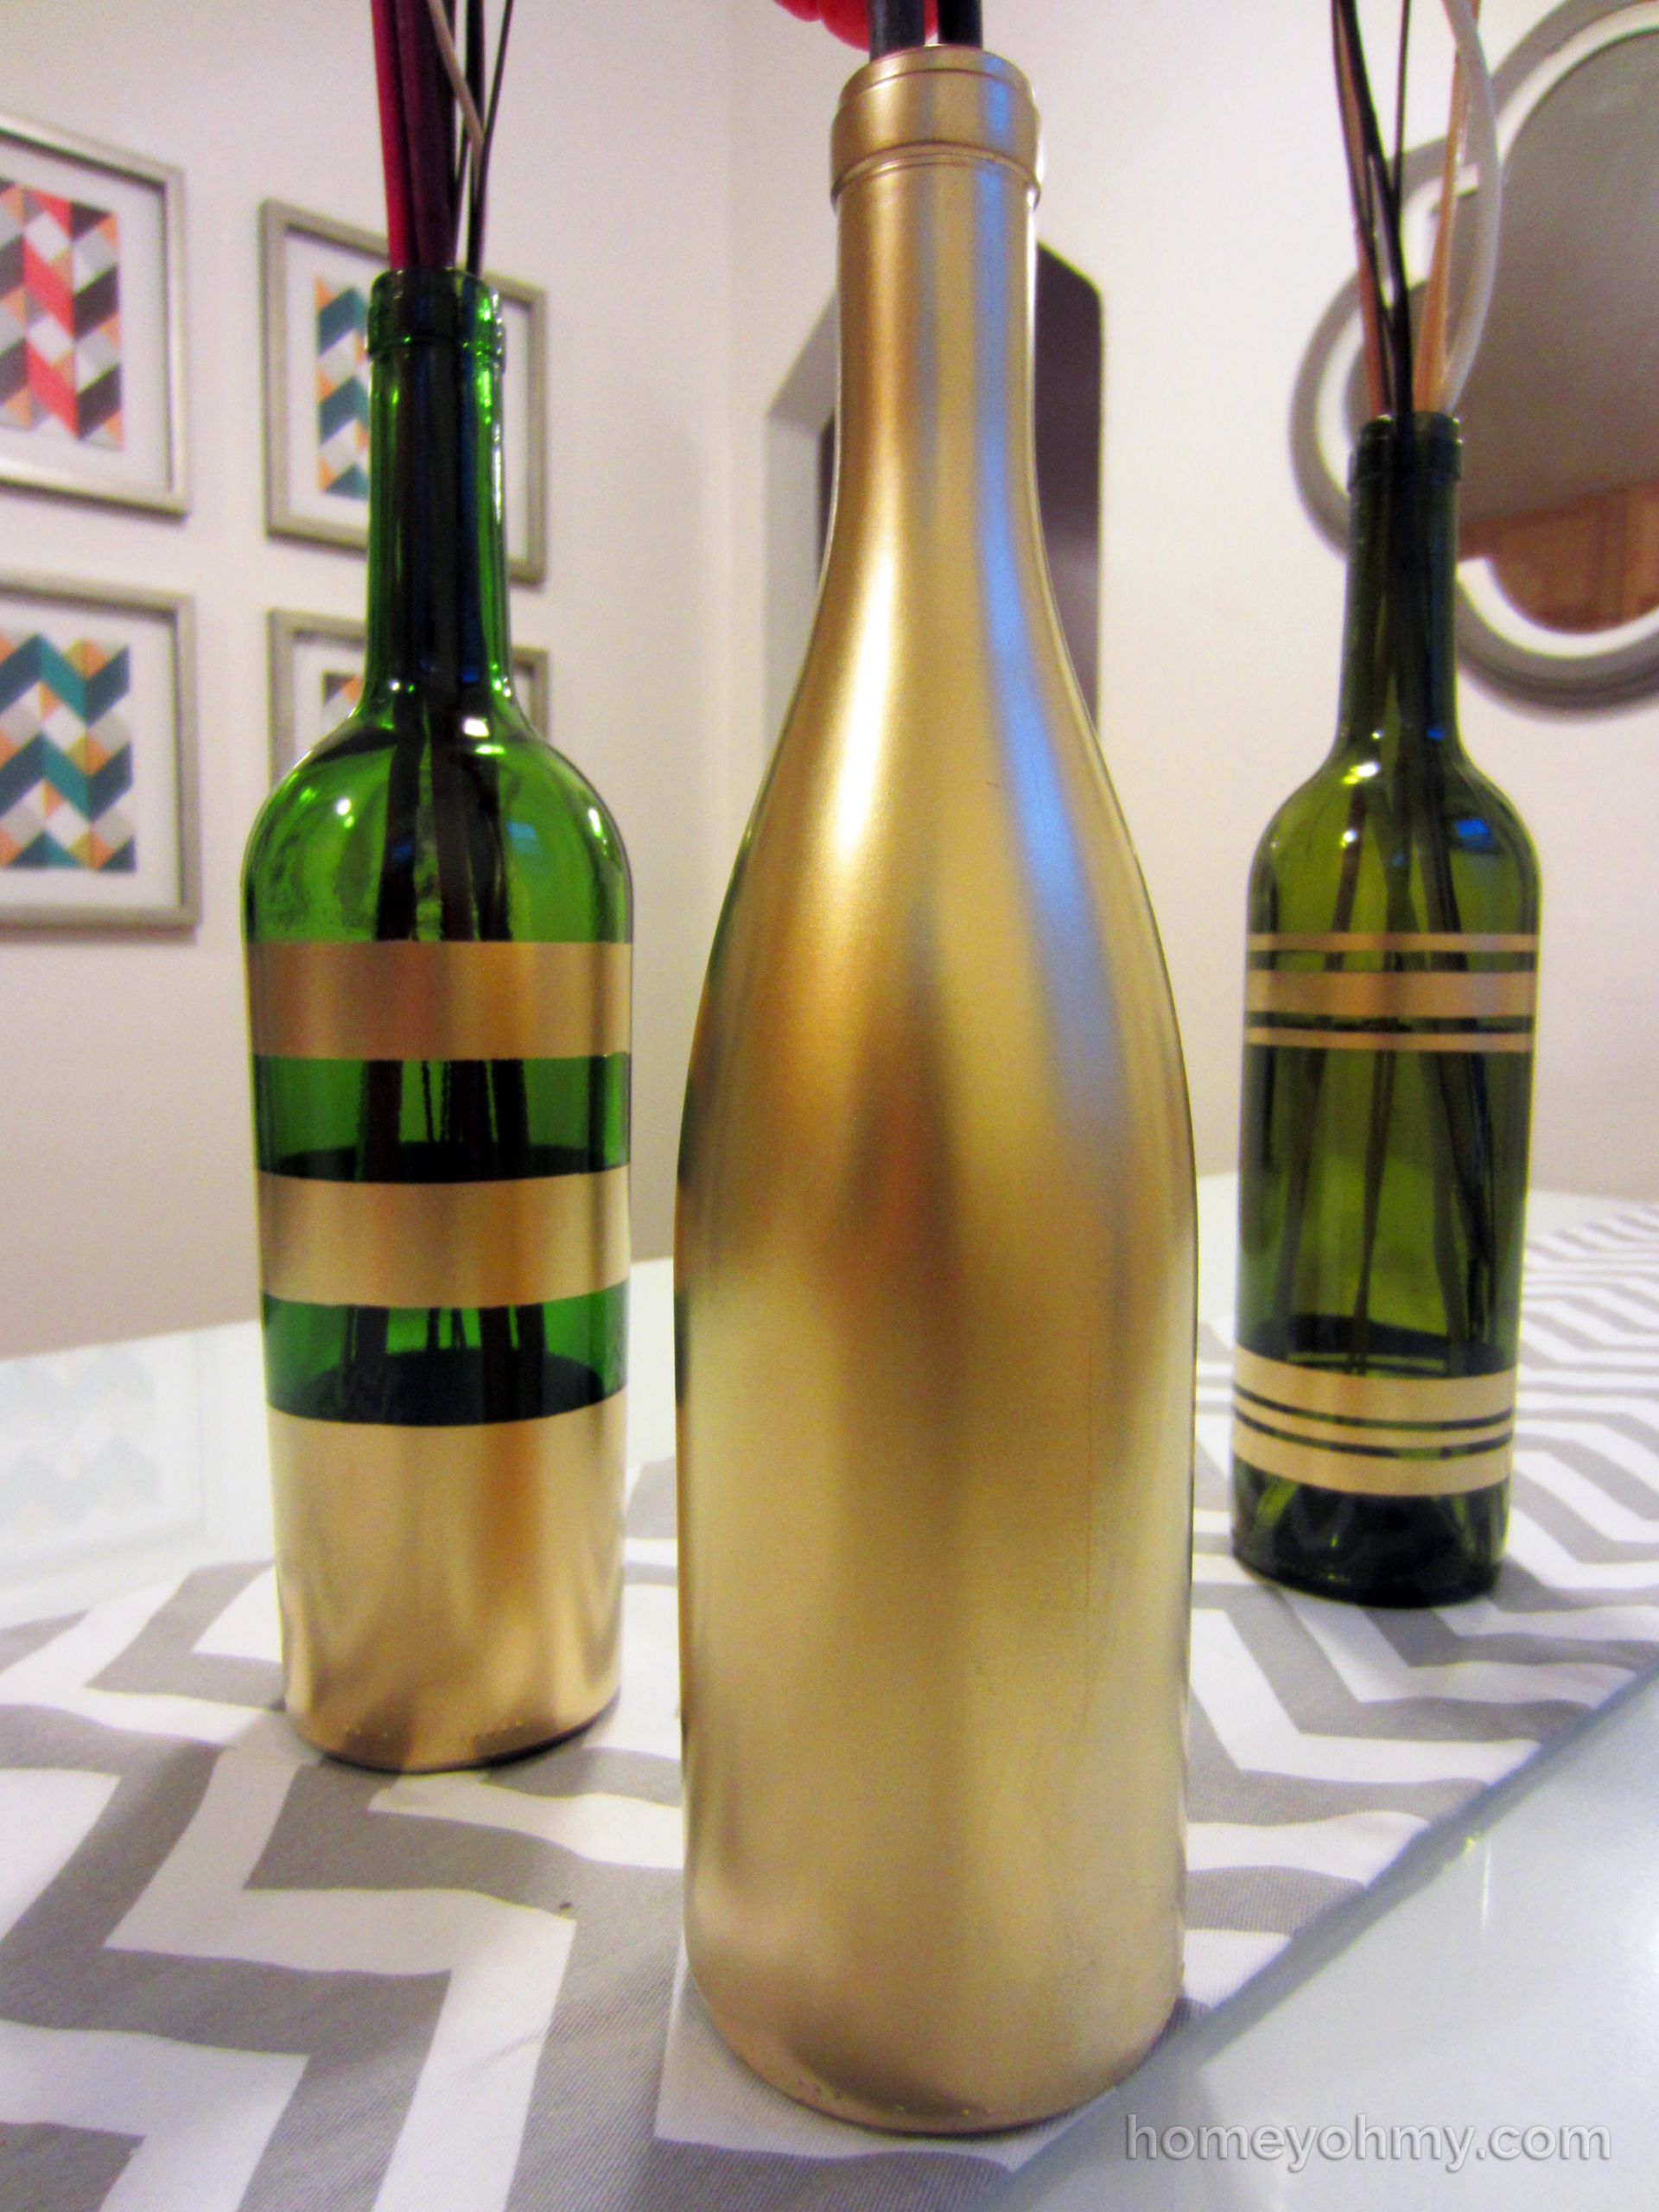 DIY Wine Bottle Decorations
 DIY Spray Painted Wine Bottles for Fall Decorating Homey